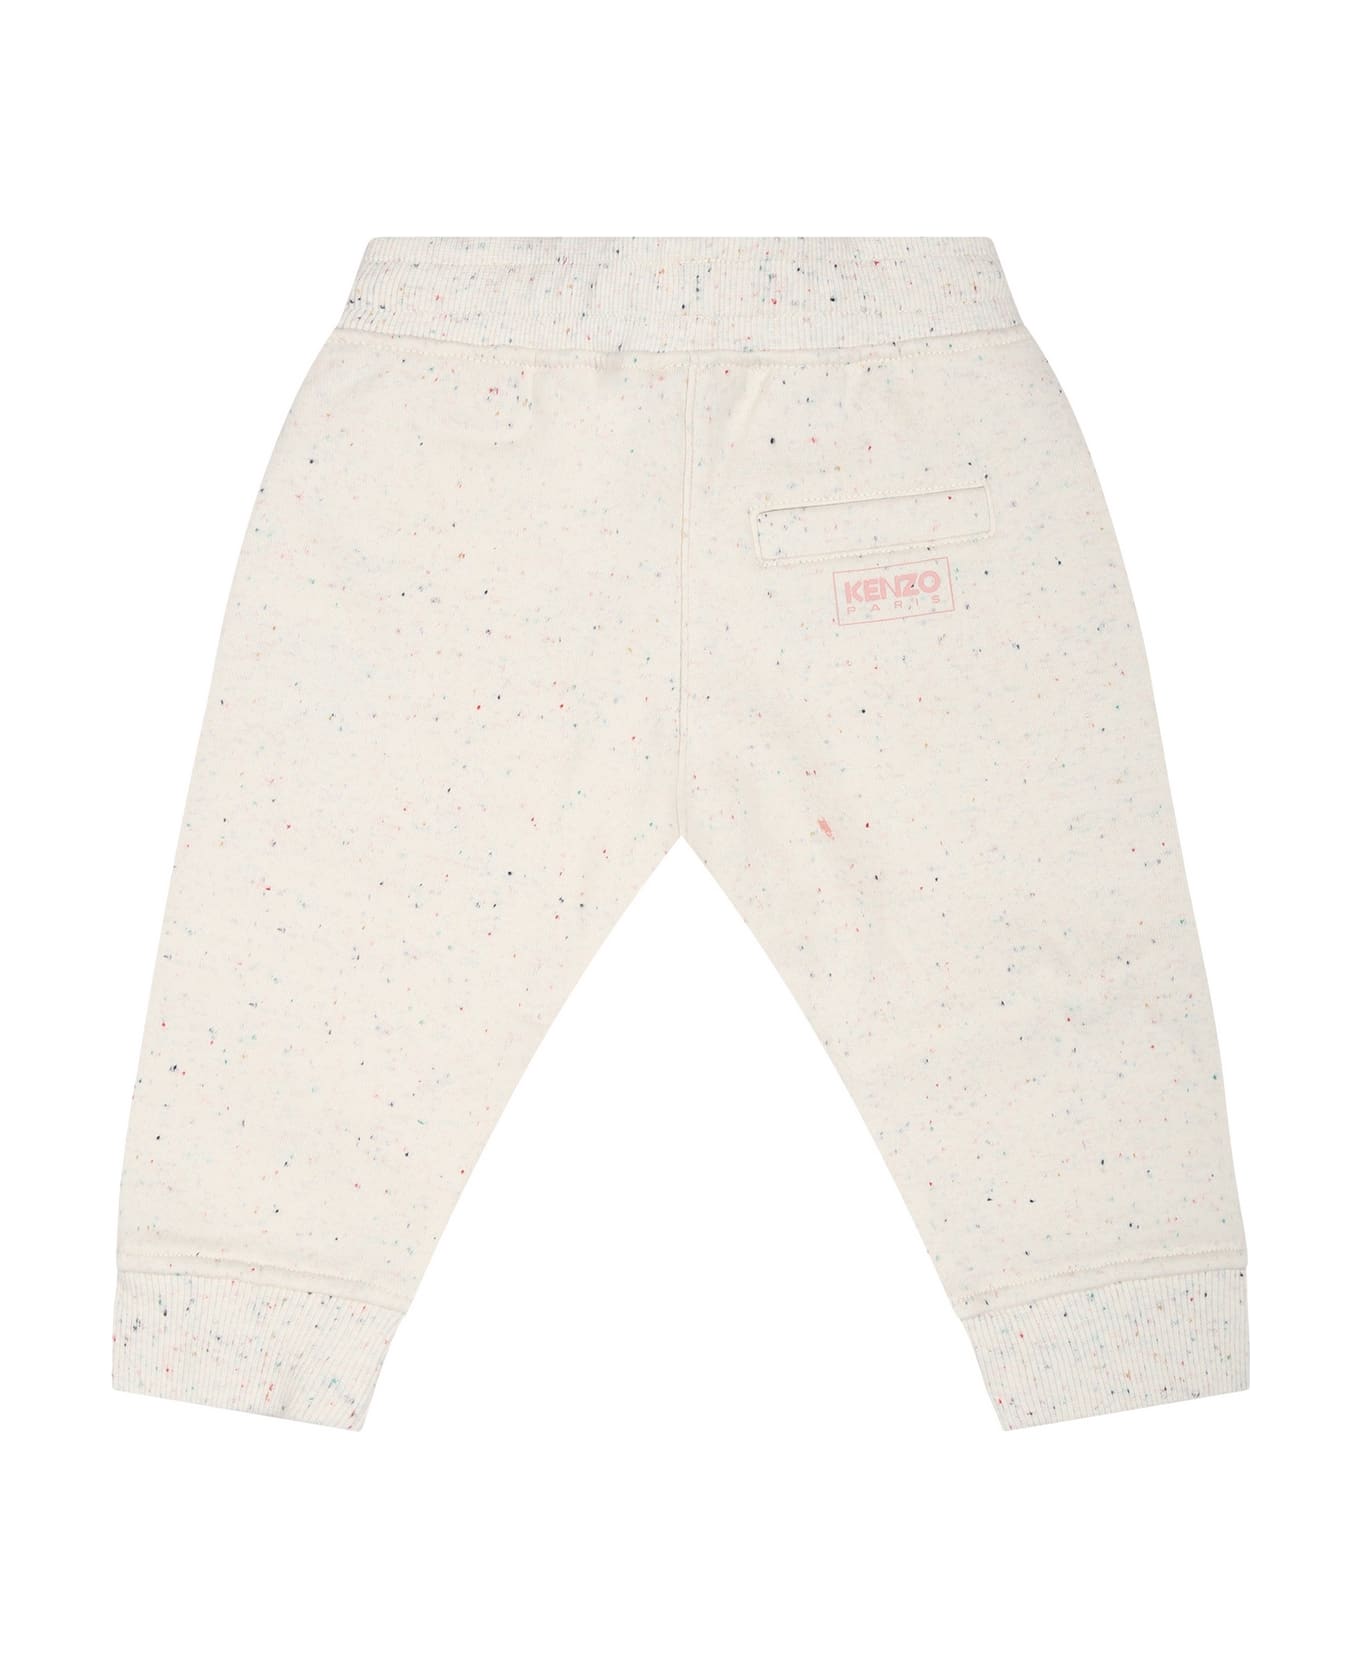 Kenzo Kids Ivory Trousers For Baby Girl - Ivory